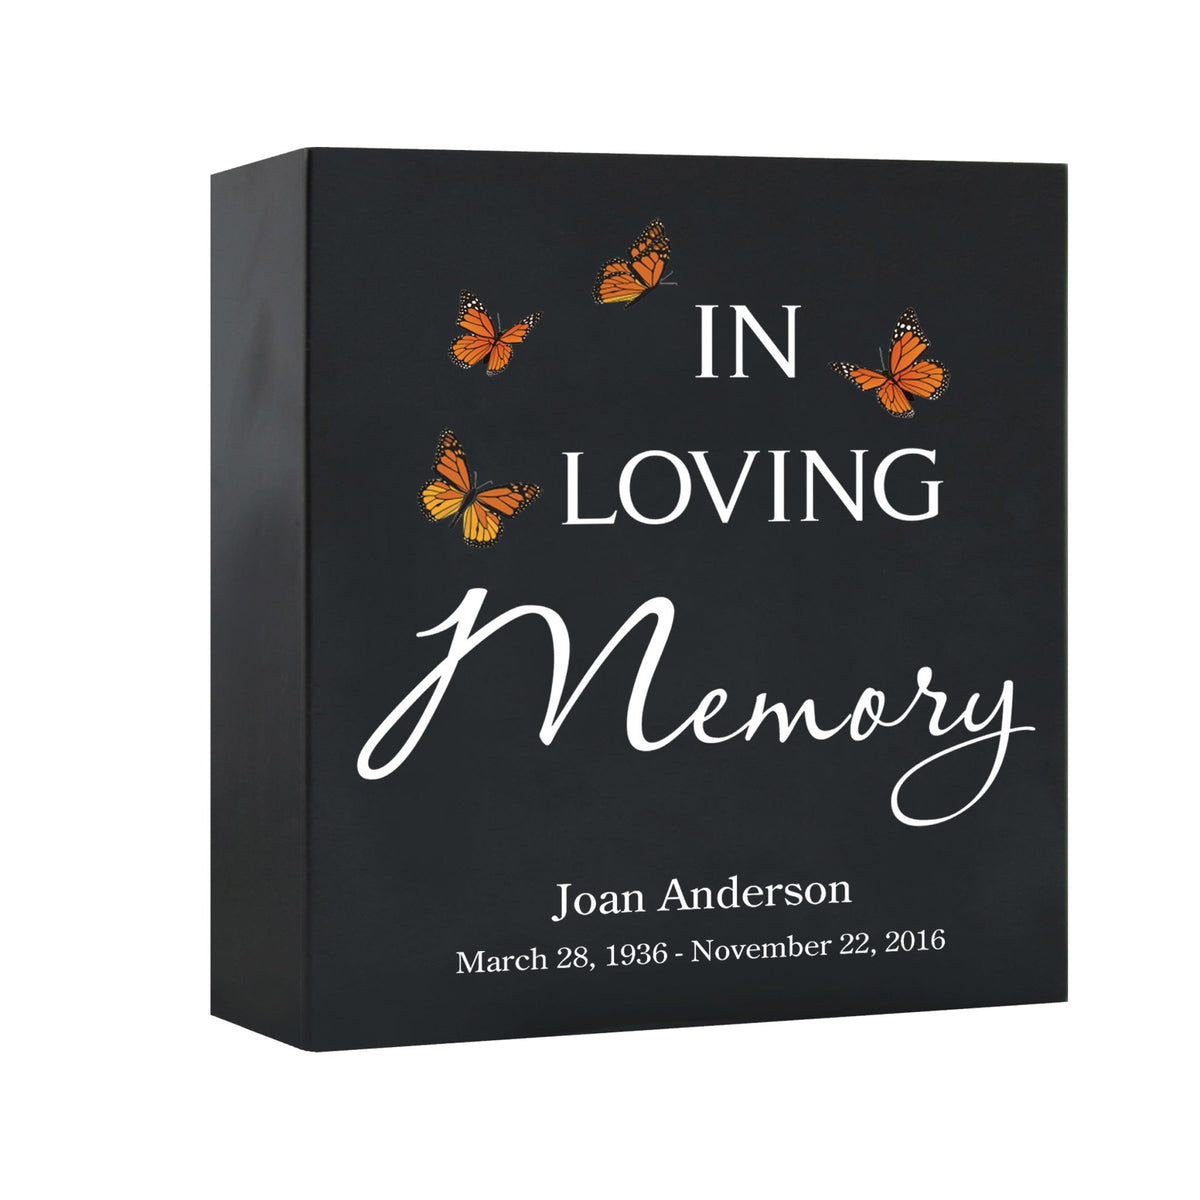 Custom Engraved Memorial Keepsake Wooden Cremation Shadow Box and Urn 10x10in Holds 189 Cu Inches Of Human Ashes In Loving Memory - LifeSong Milestones